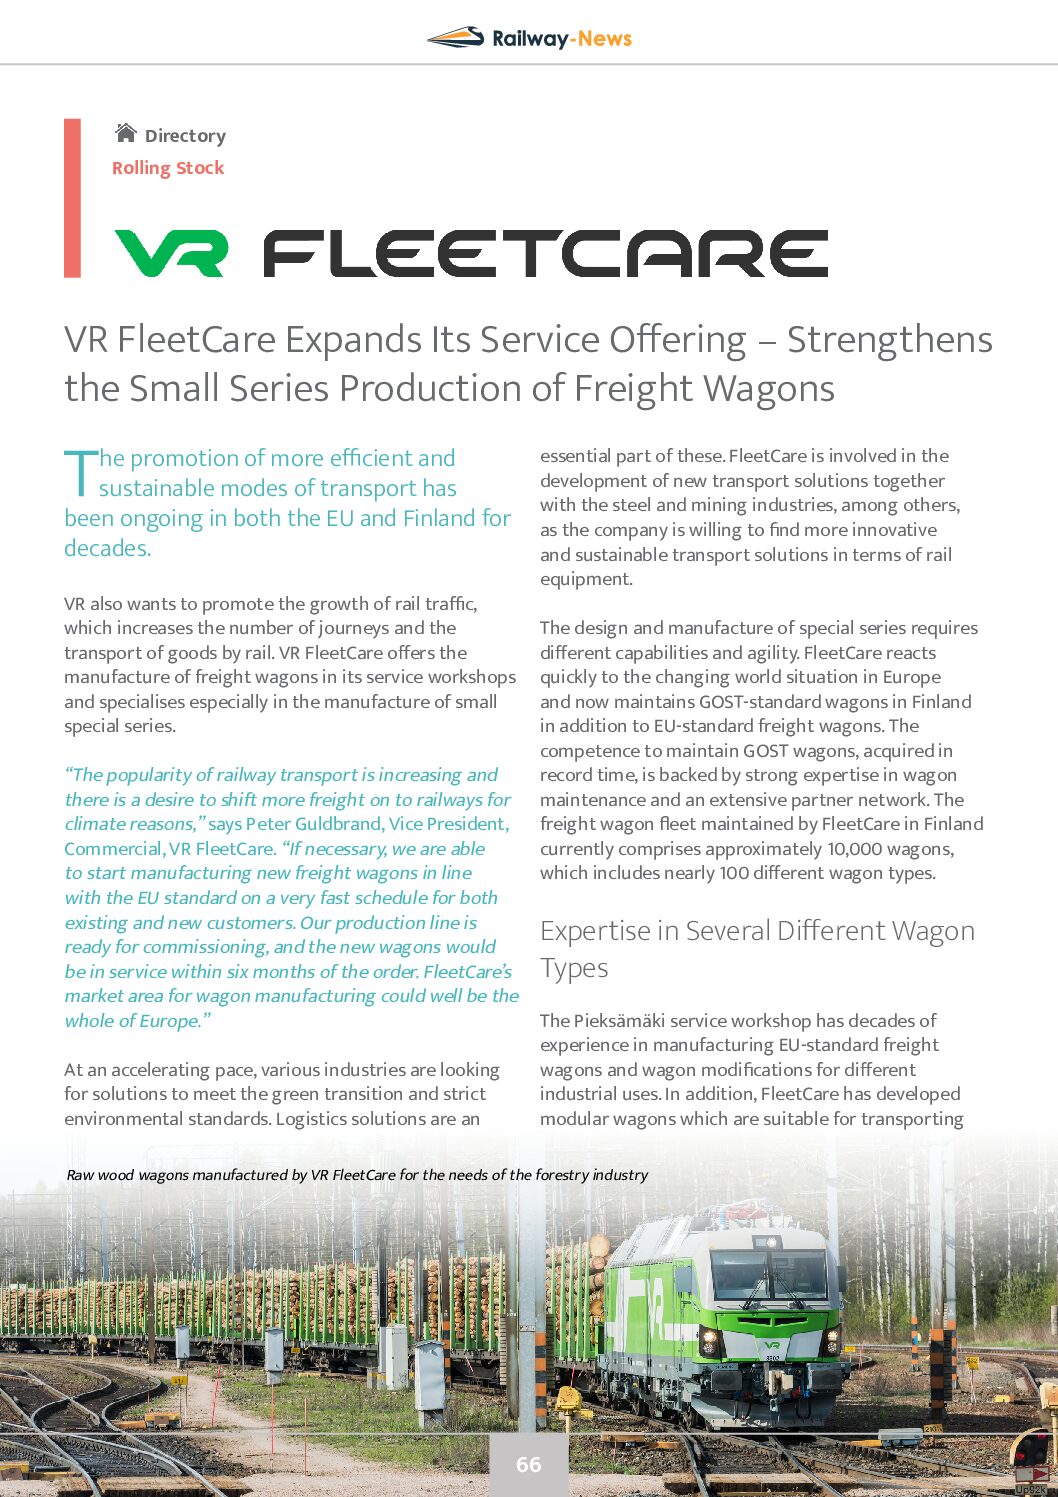 VR FleetCare Expands Its Service Offering